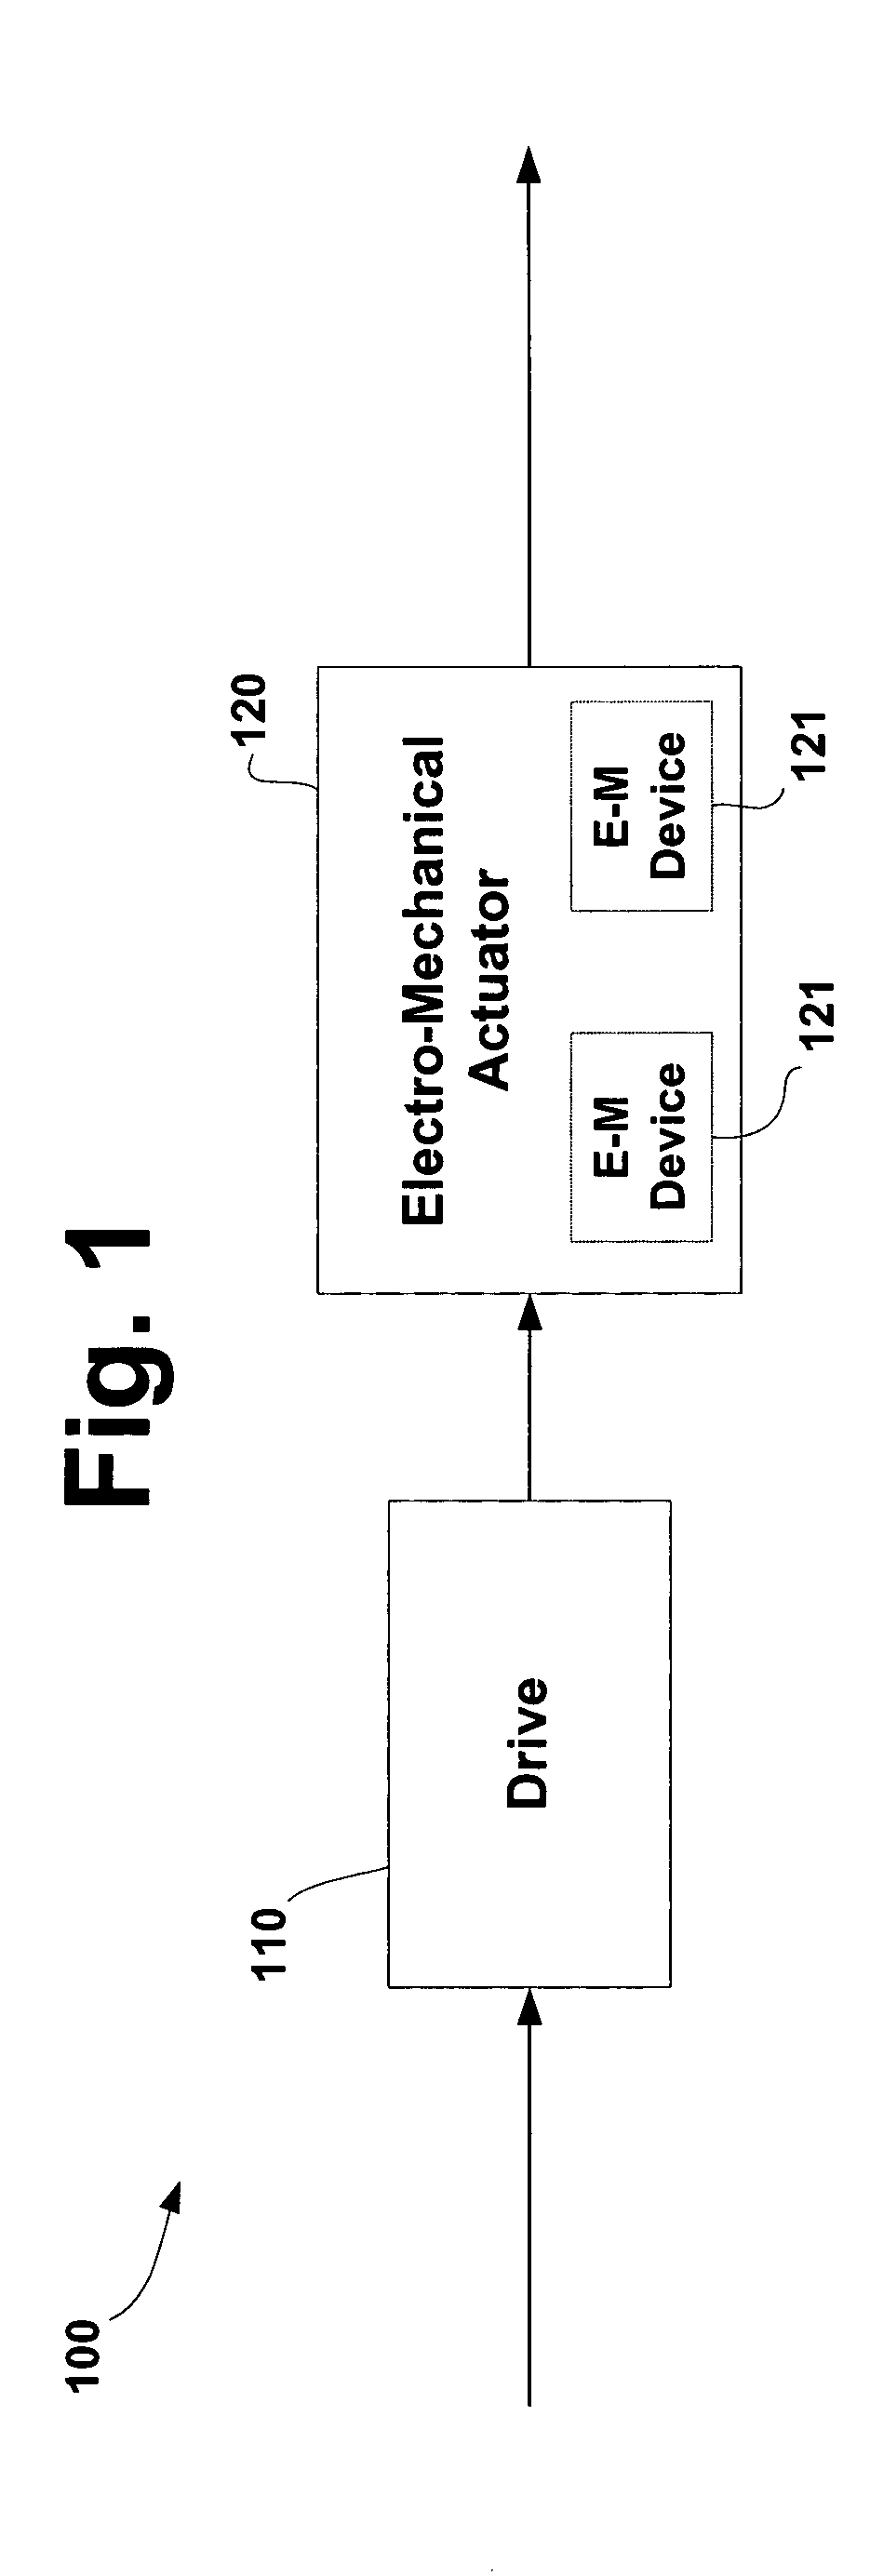 Haptic devices having multiple operational modes including at least one resonant mode